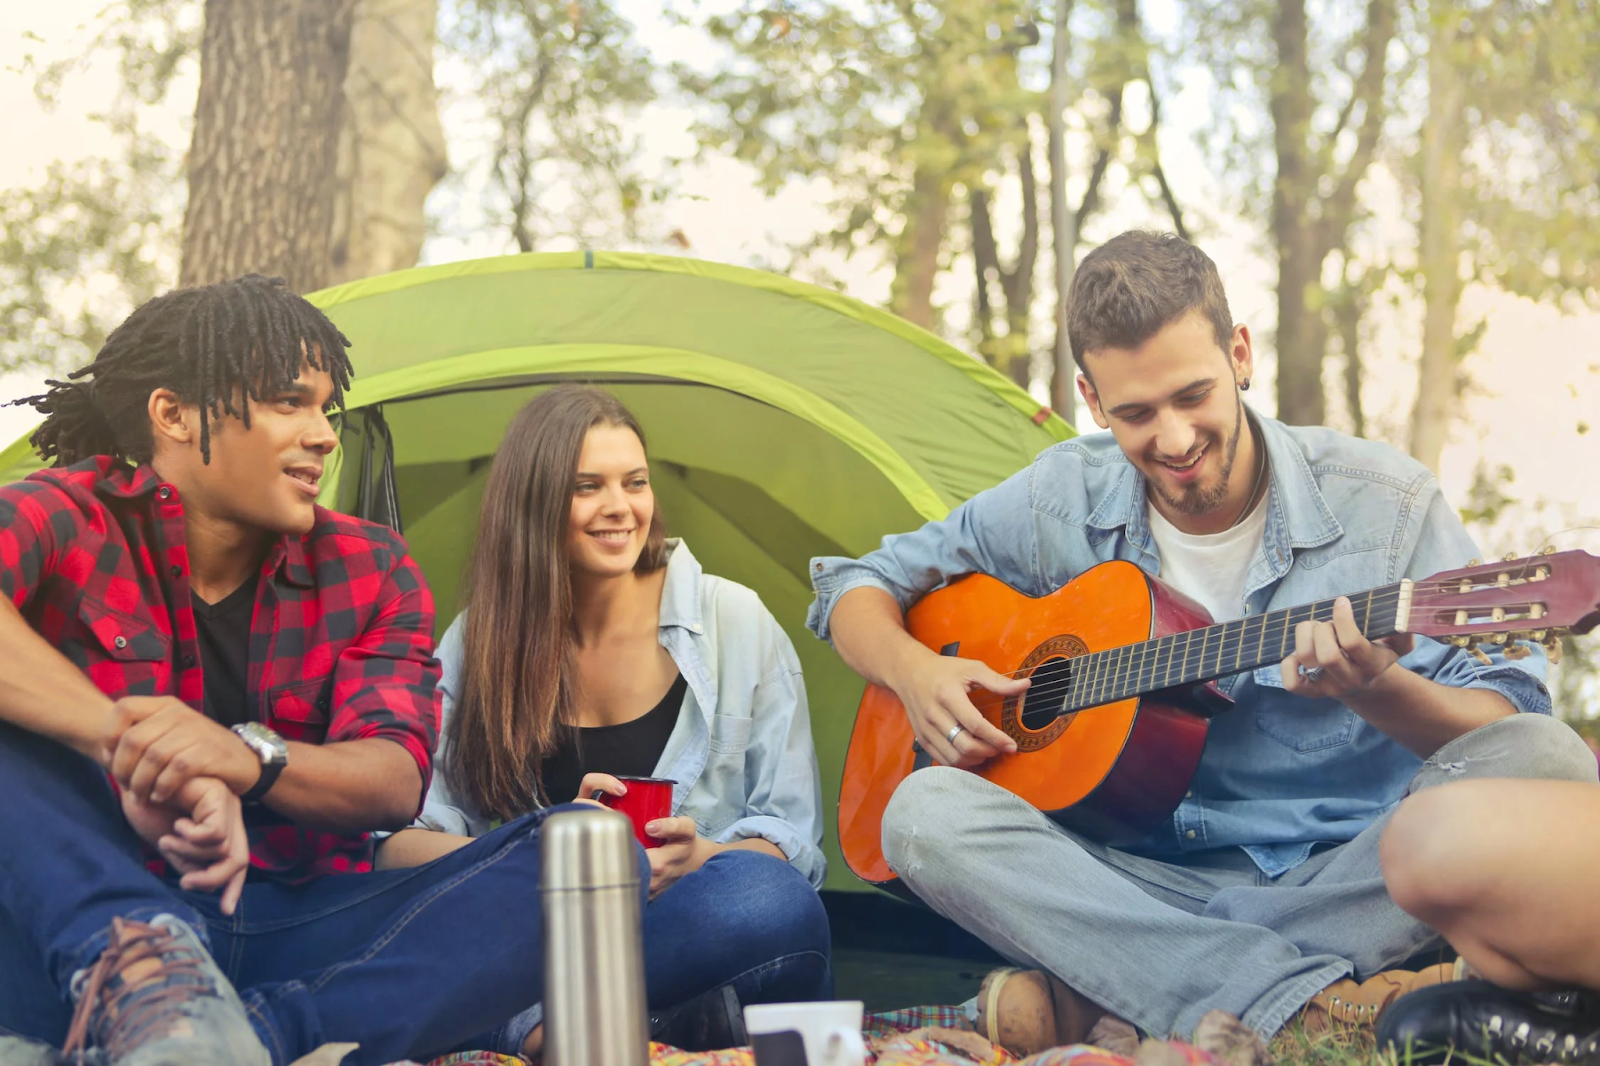 A group of people sitting in a tent playing guitar

Description automatically generated with medium confidence